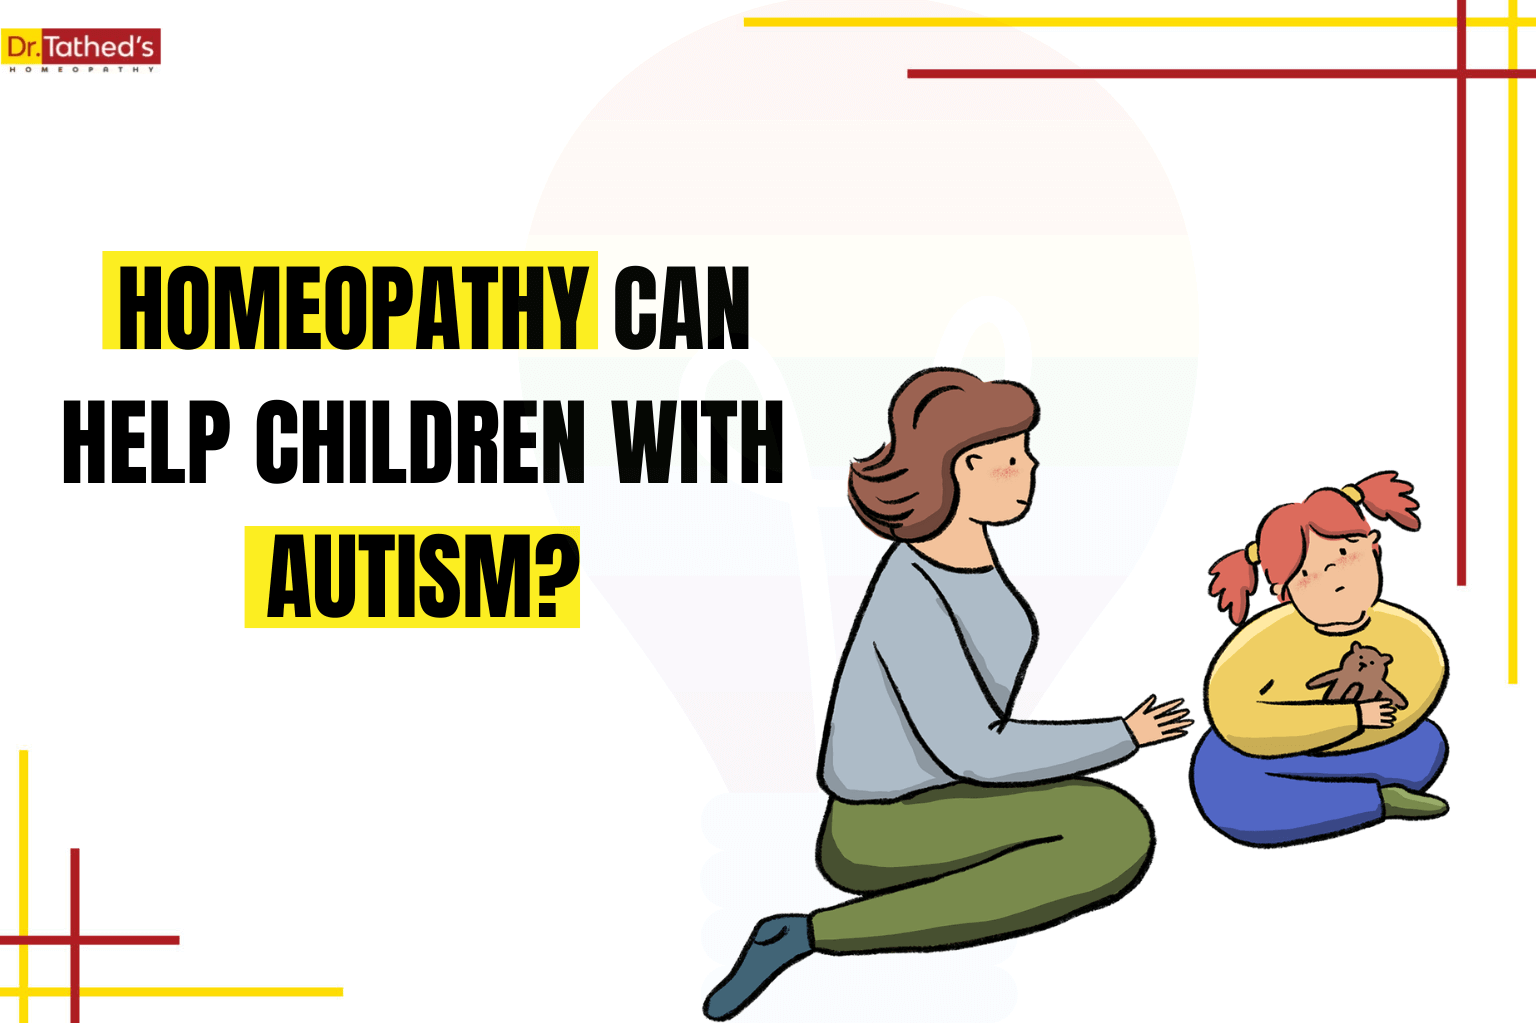 HOW HOMEOPATHY CAN HELP CHILDREN WITH AUTISM?